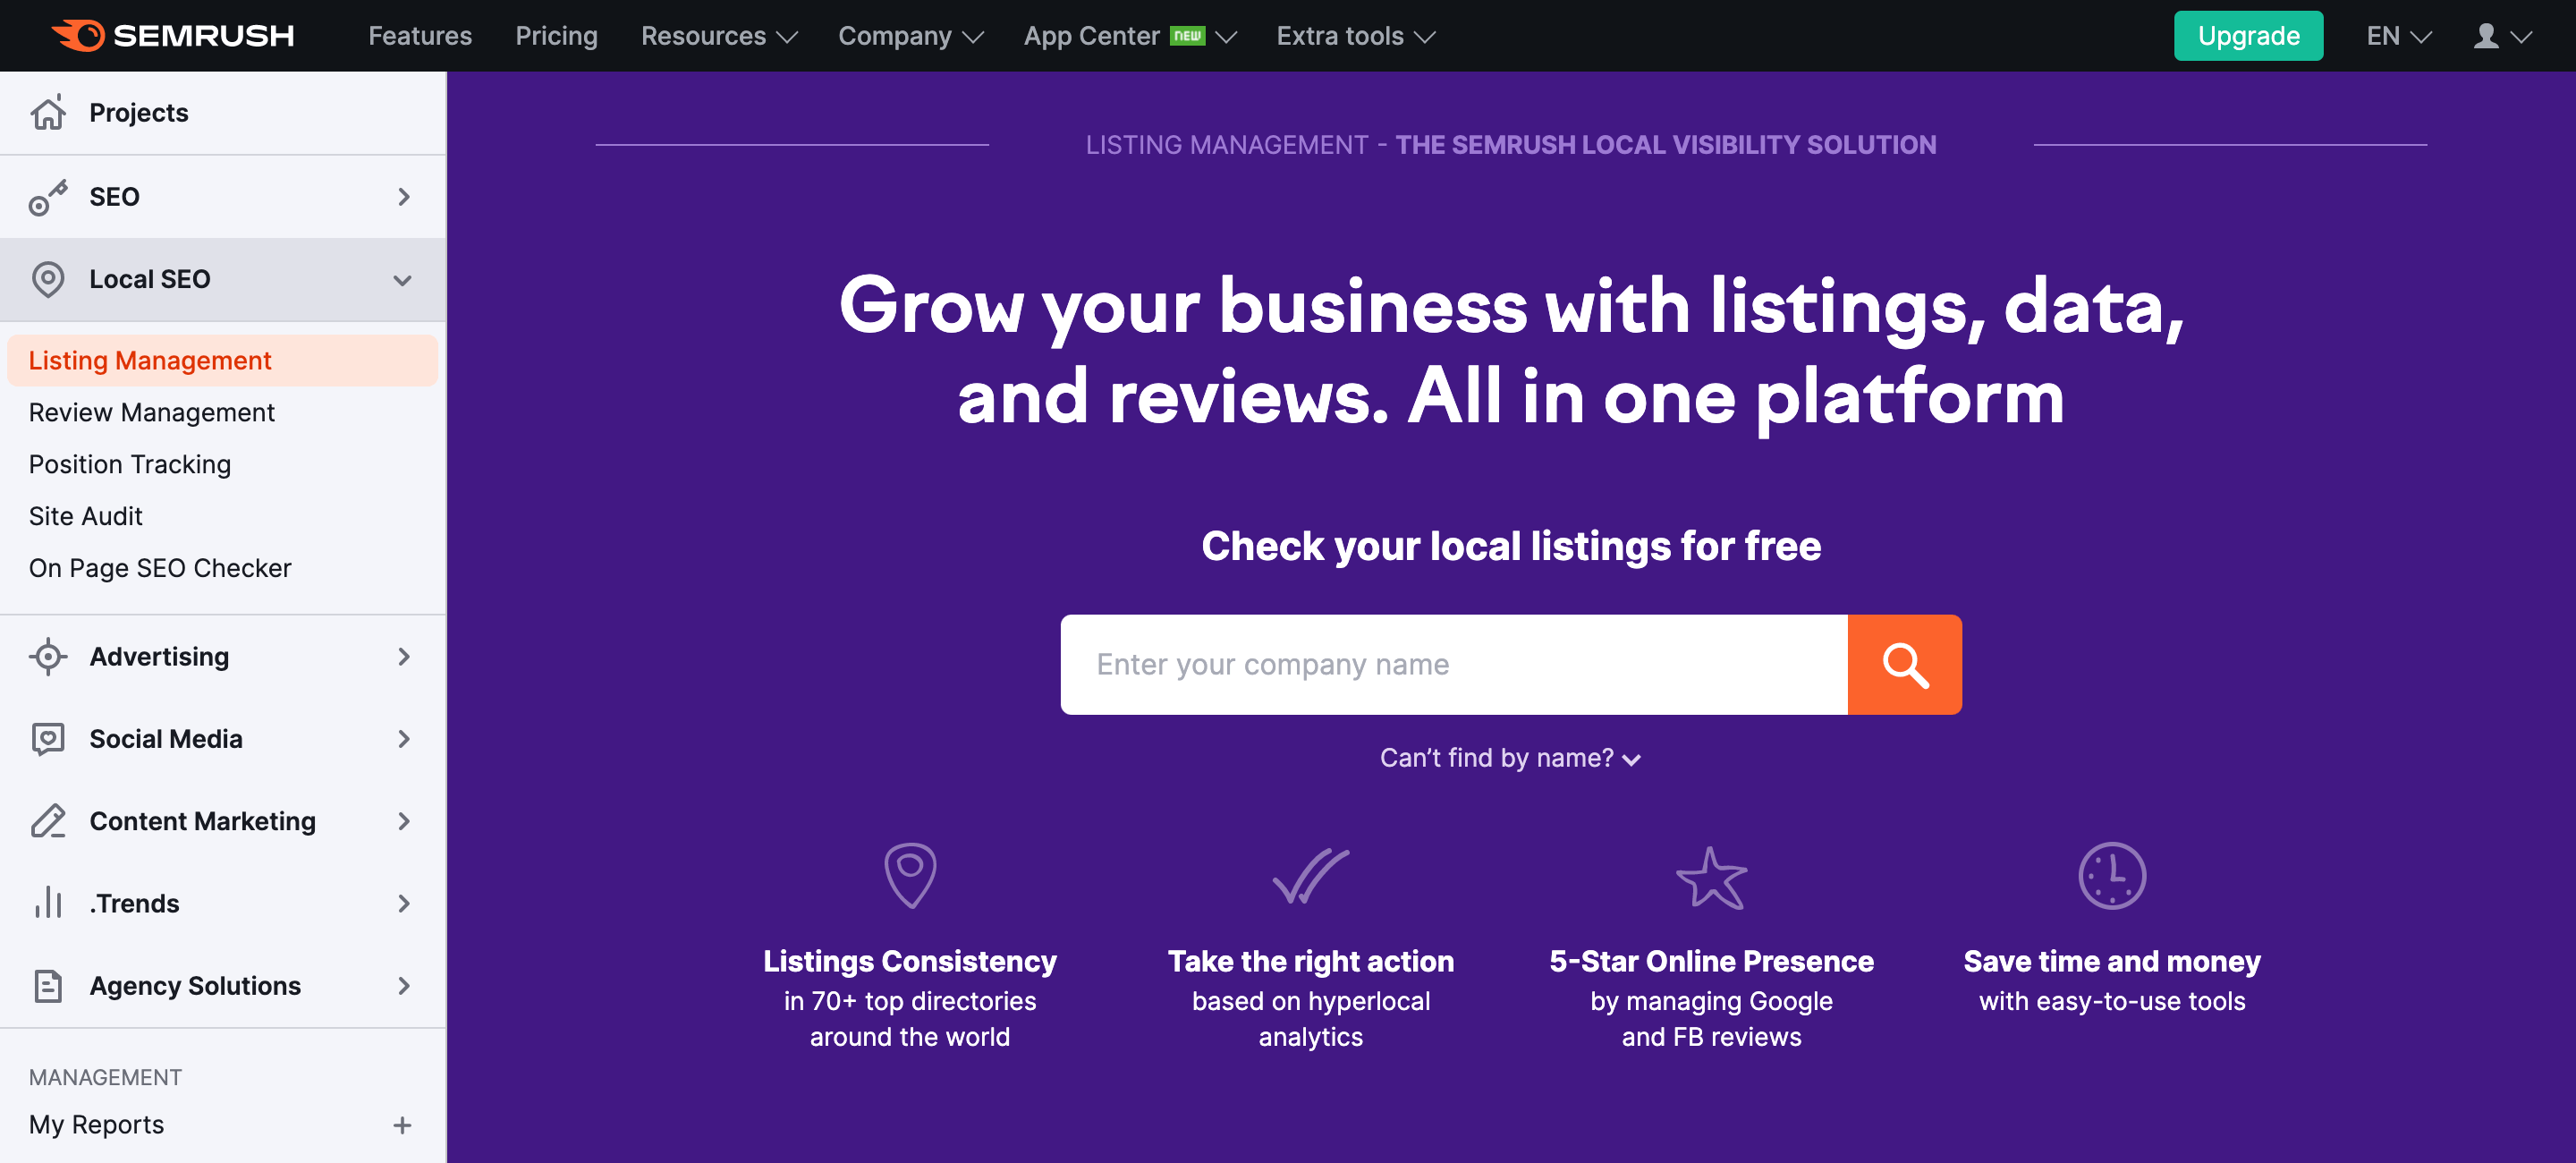 Listing and Review Management